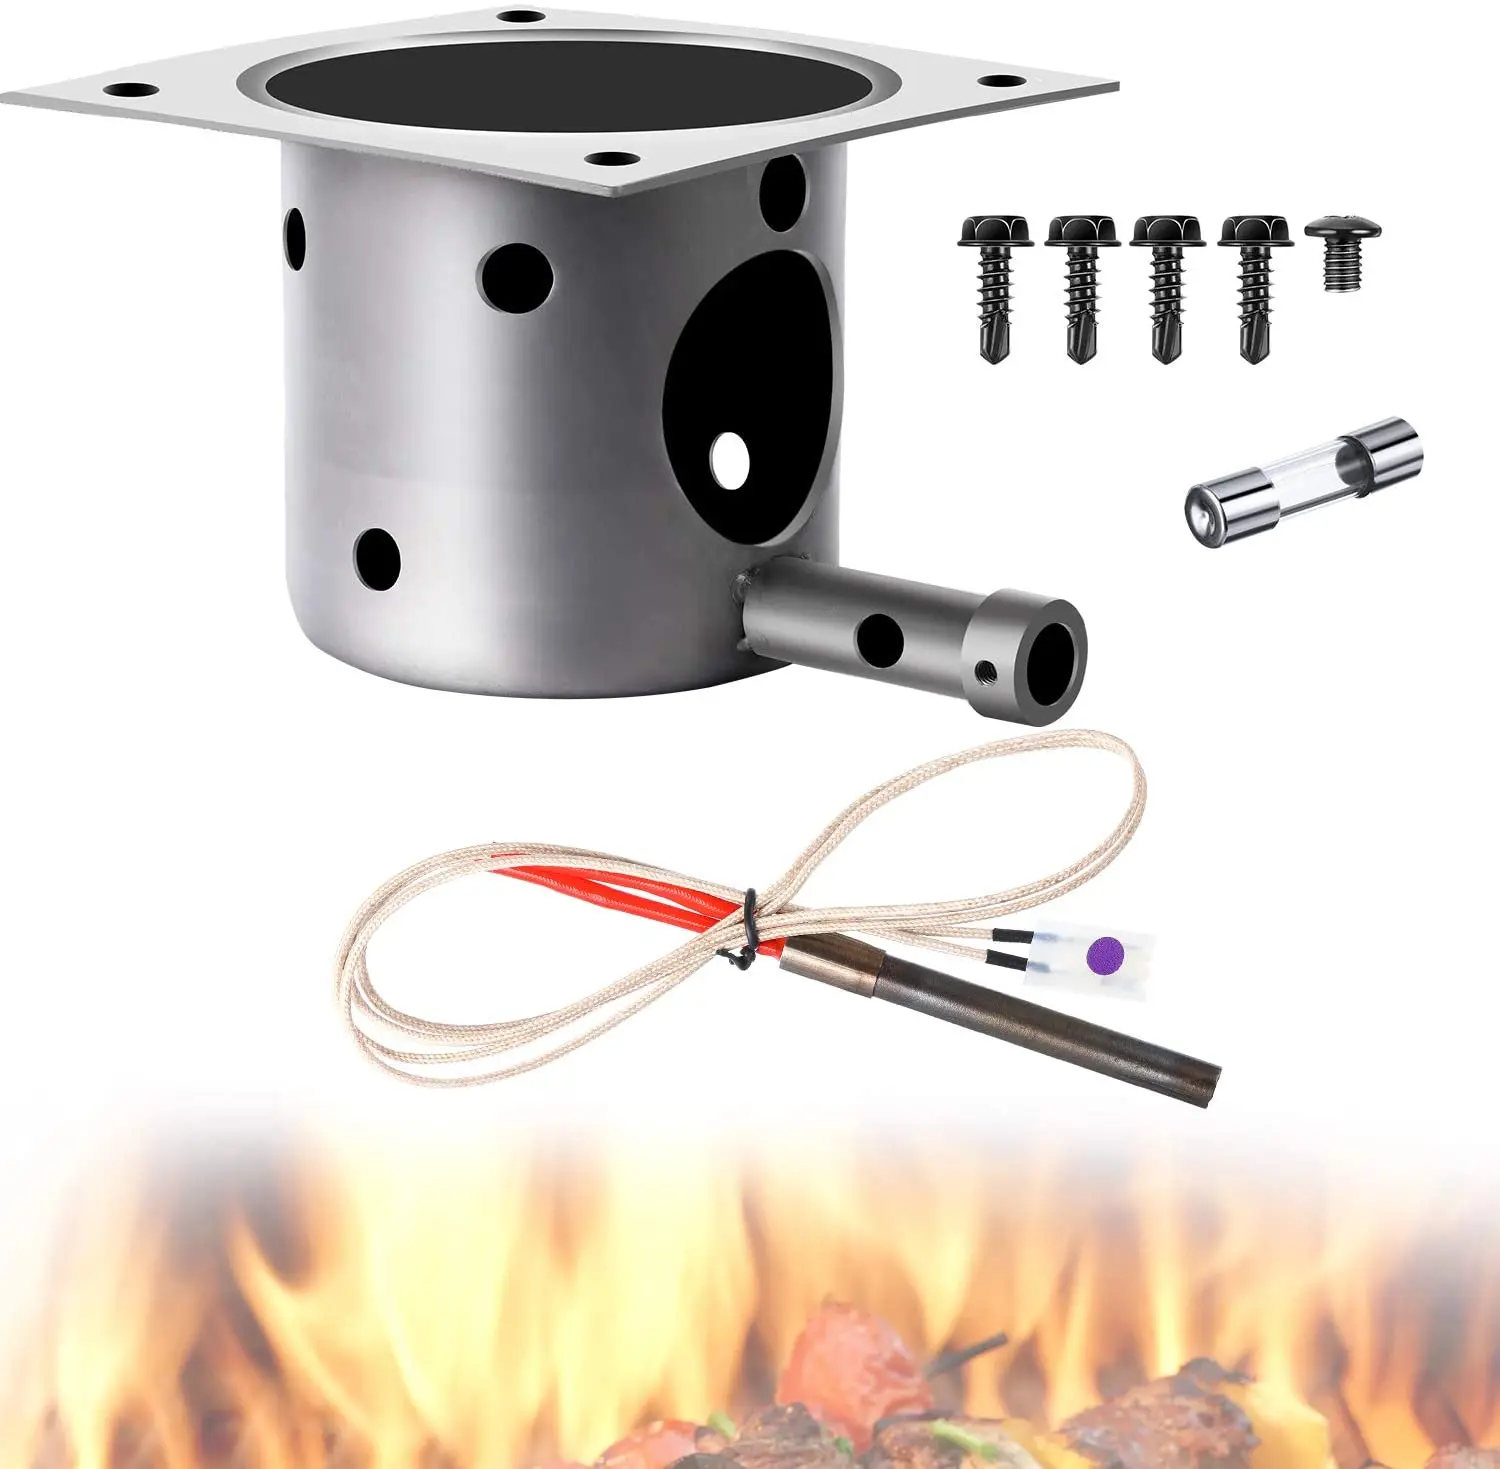 Details about   Fire Burn Pot Hot Rod Igniter Fits for Traeger and Pit Boss Wood Pellet Grills 